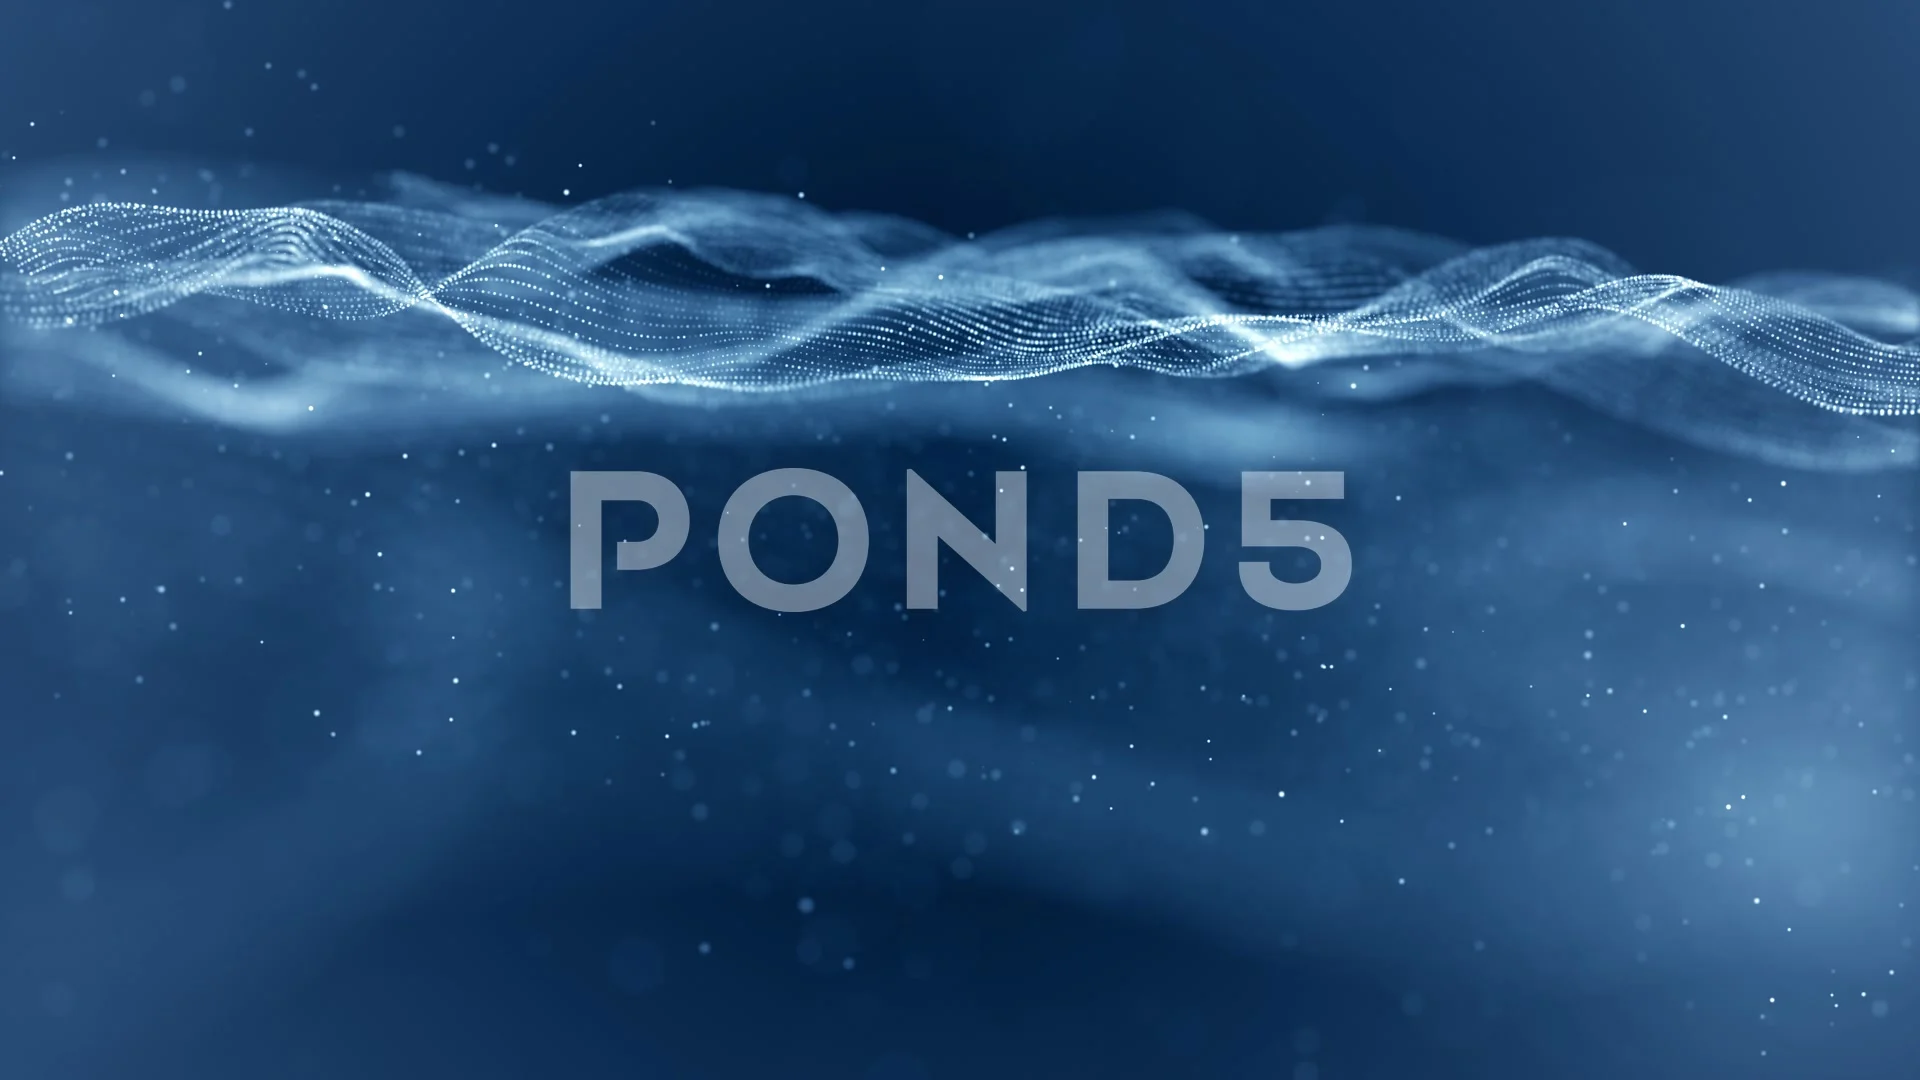 Animated video motion background - Water... | Stock Video | Pond5